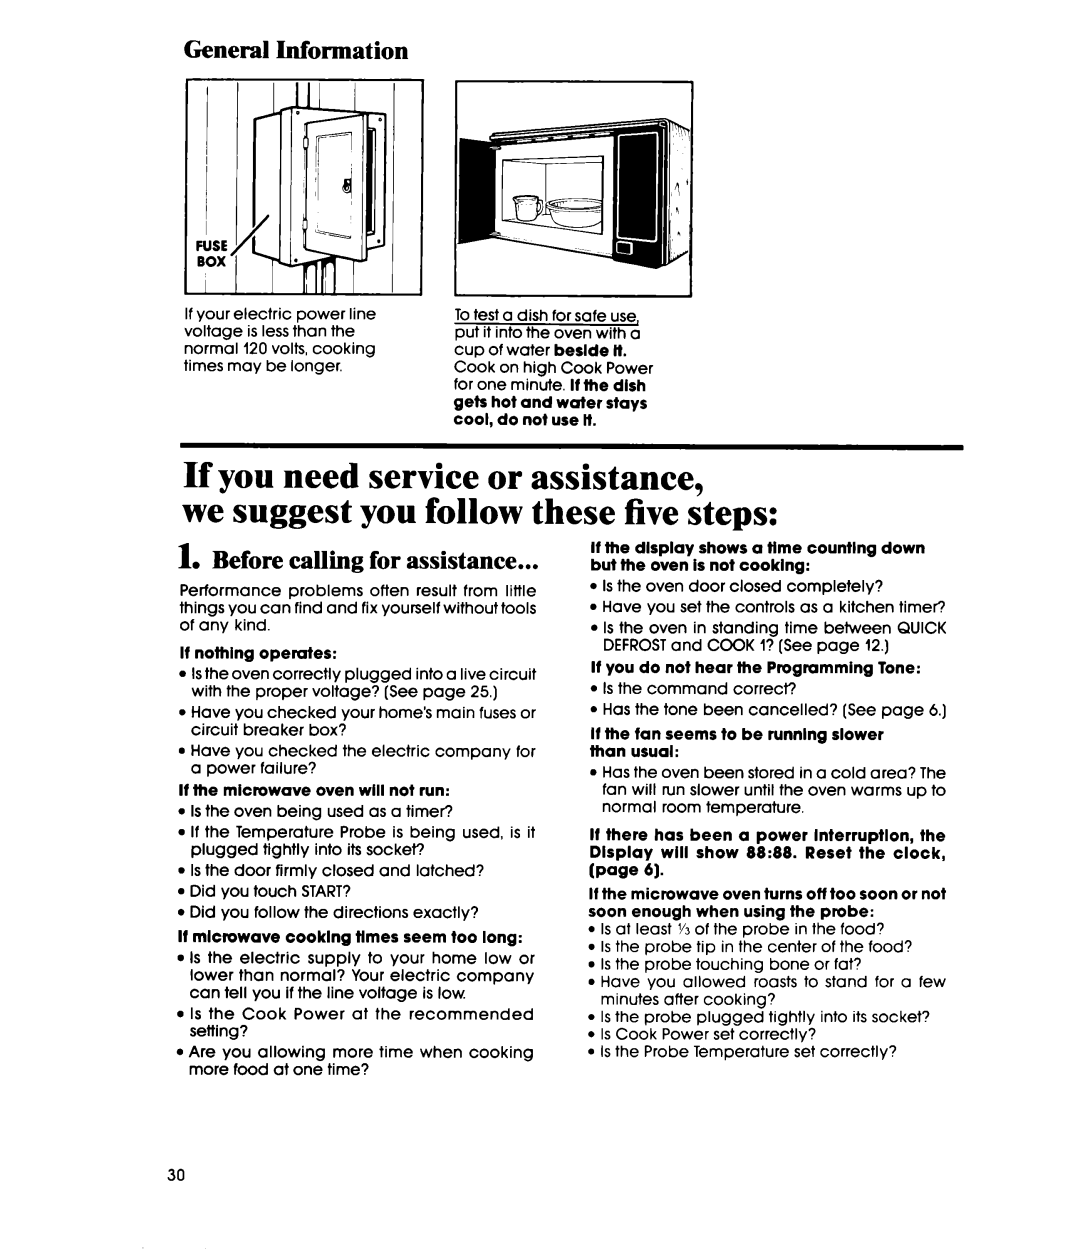 Whirlpool MW36OOXS manual If you need service or assistance, we suggest you follow these five steps, General Information 